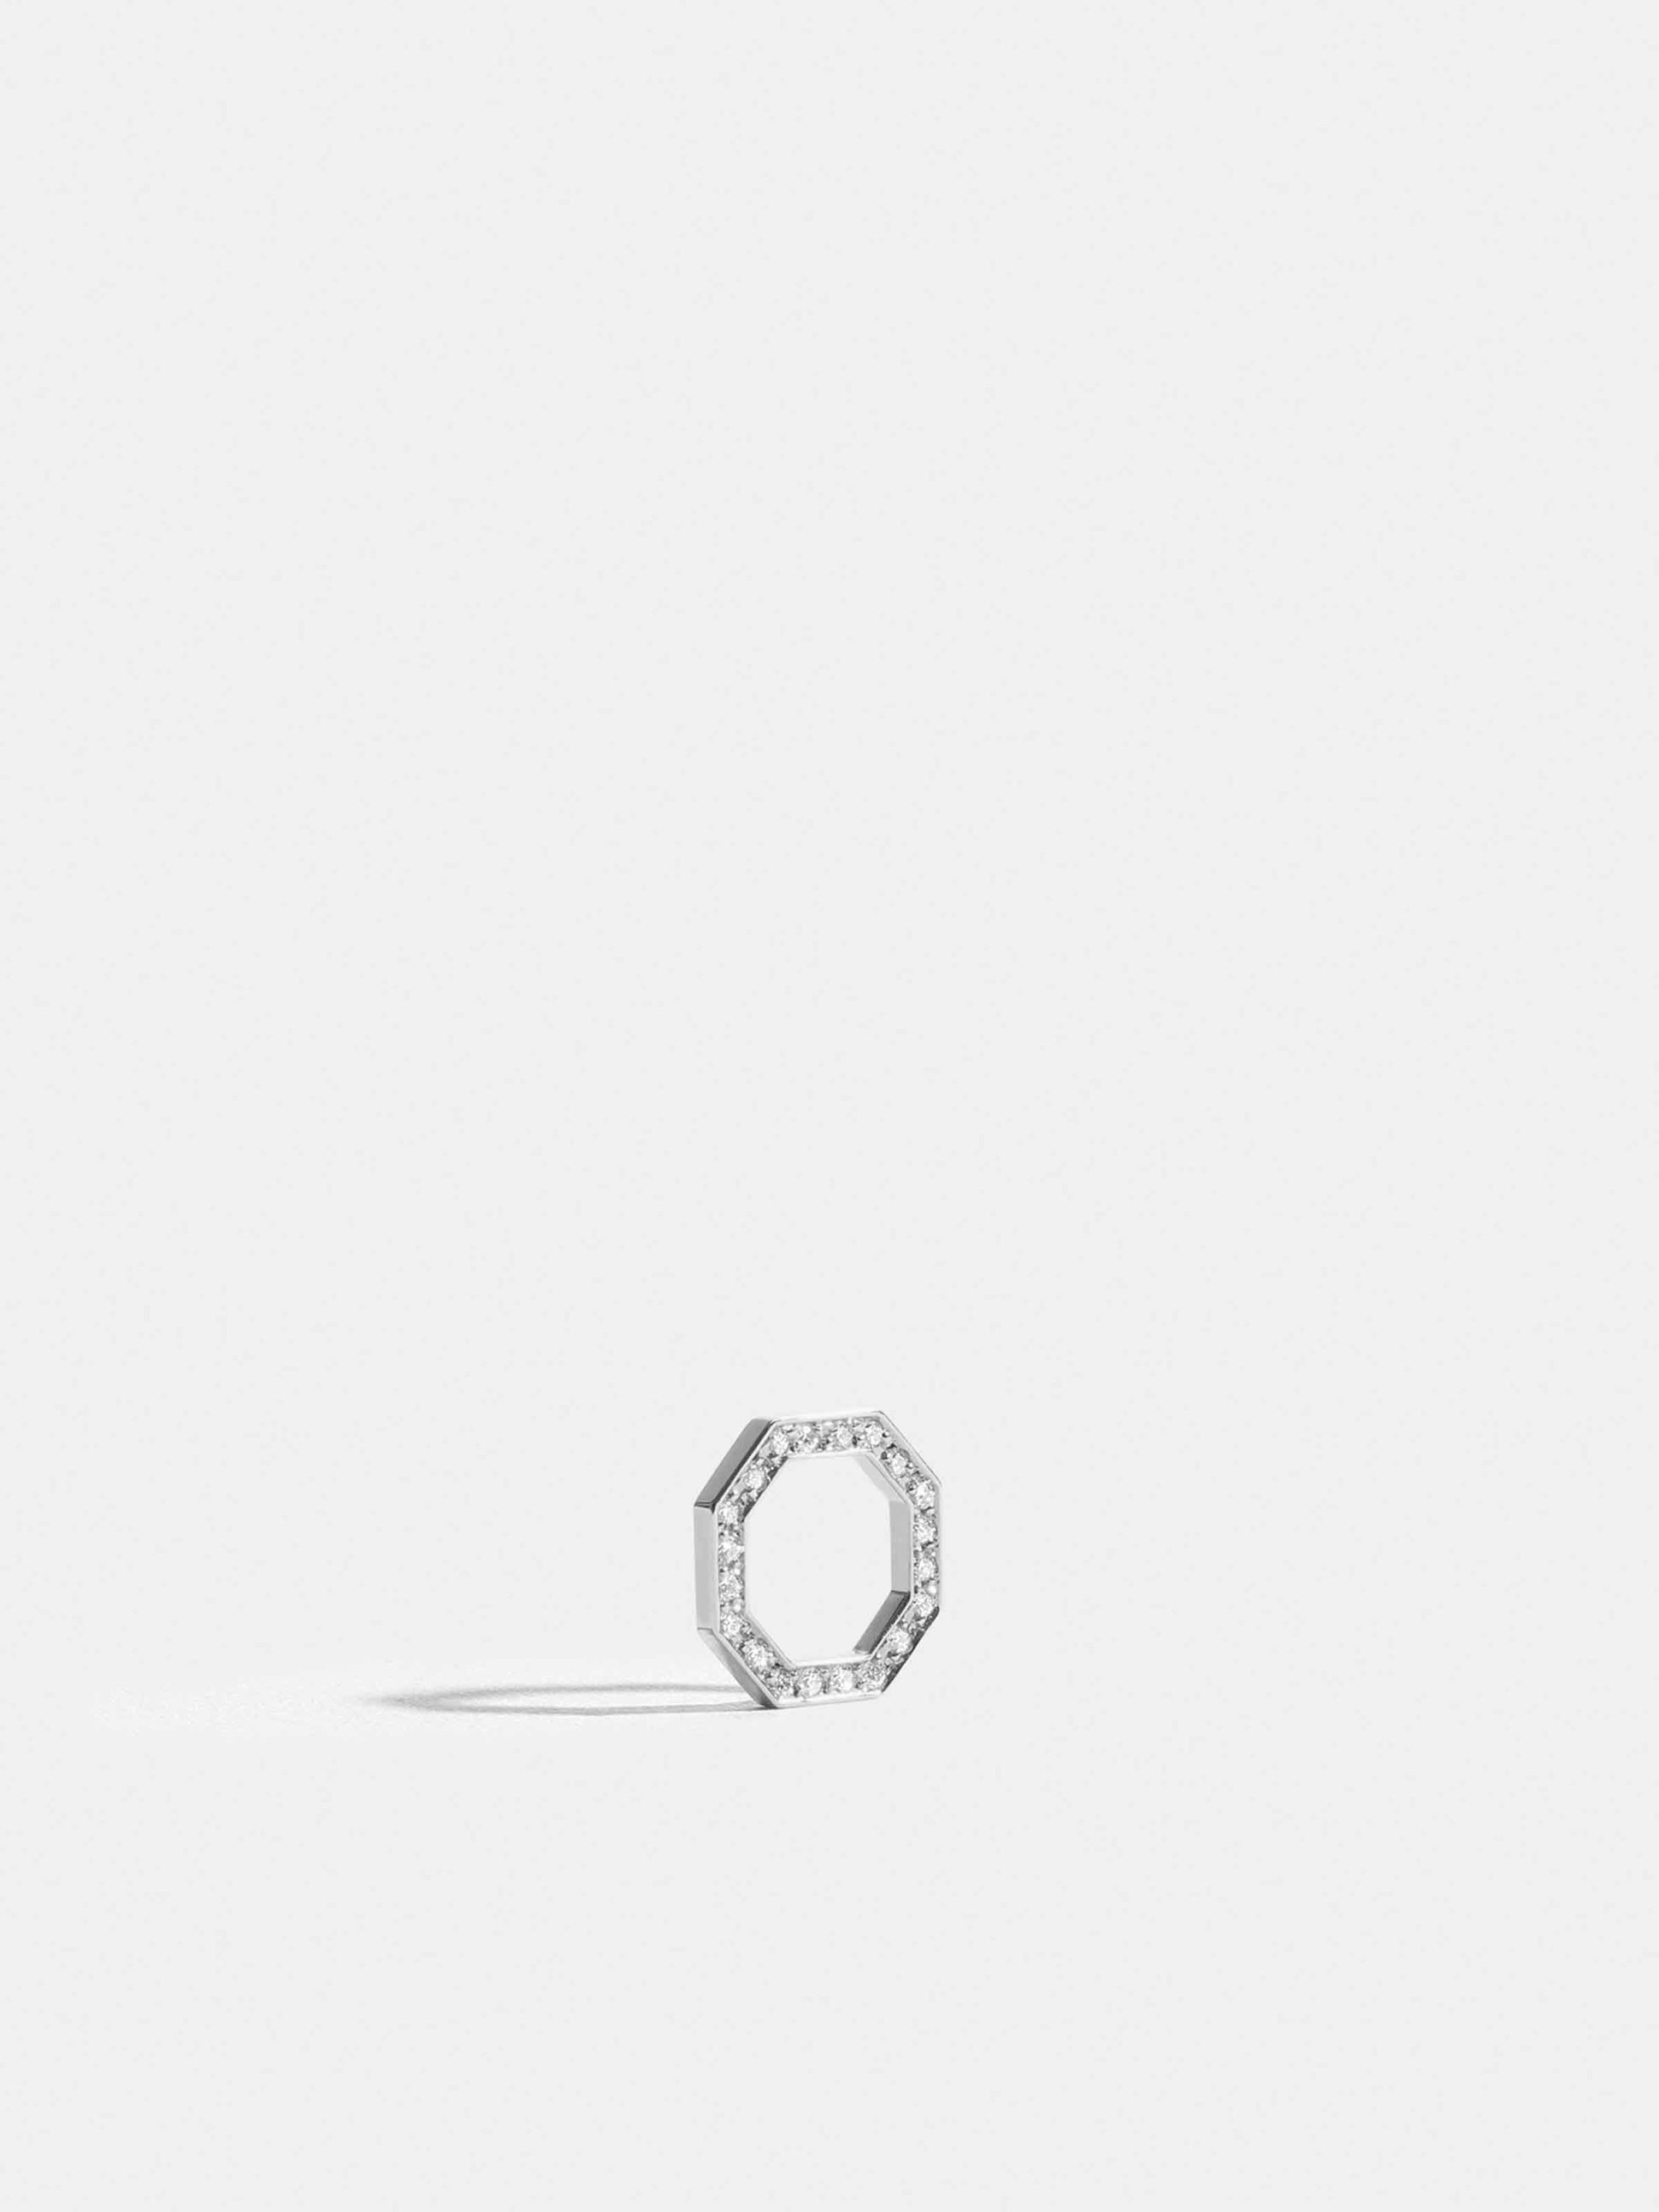 Octogone motif in 18k Fairmined ethical white gold, paved with lab-grown diamonds, on a bright orange cord.